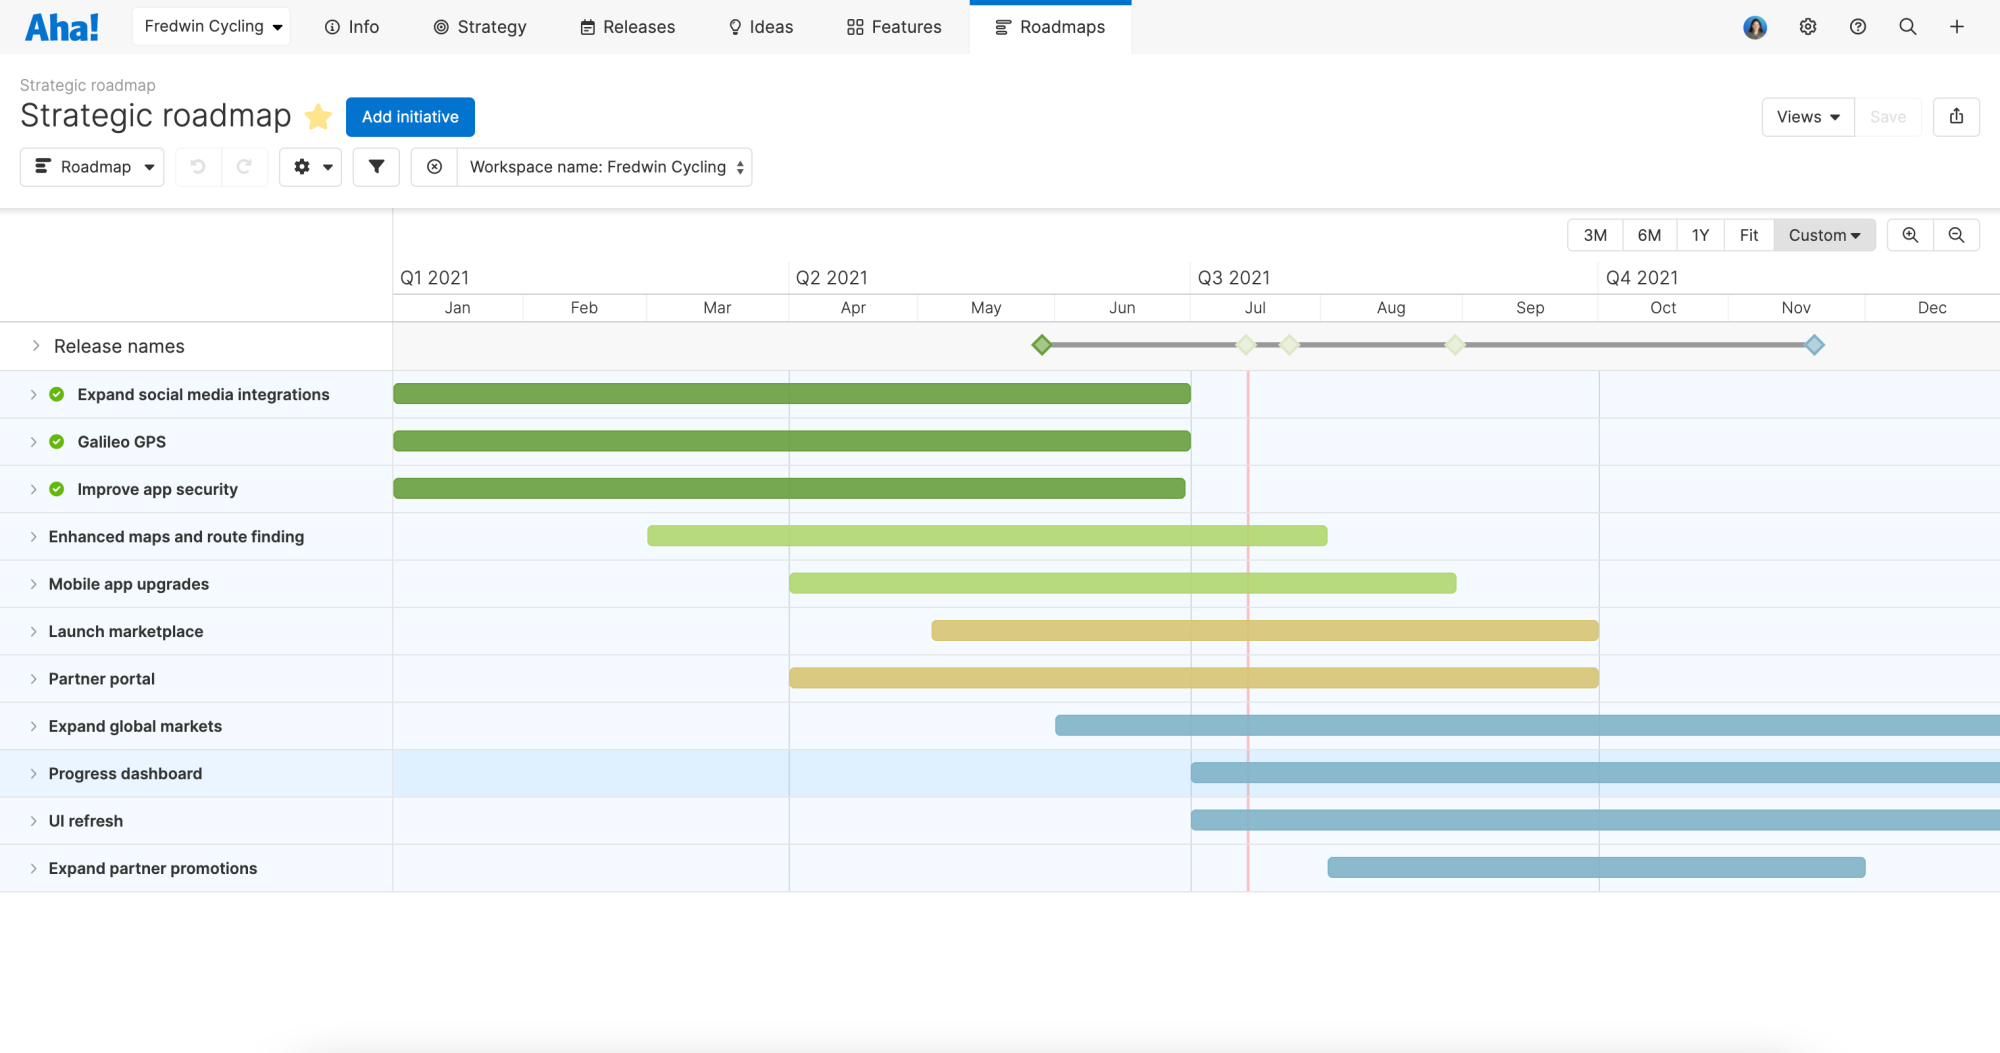 Customize your roadmap by coloring the initiative bars by status.